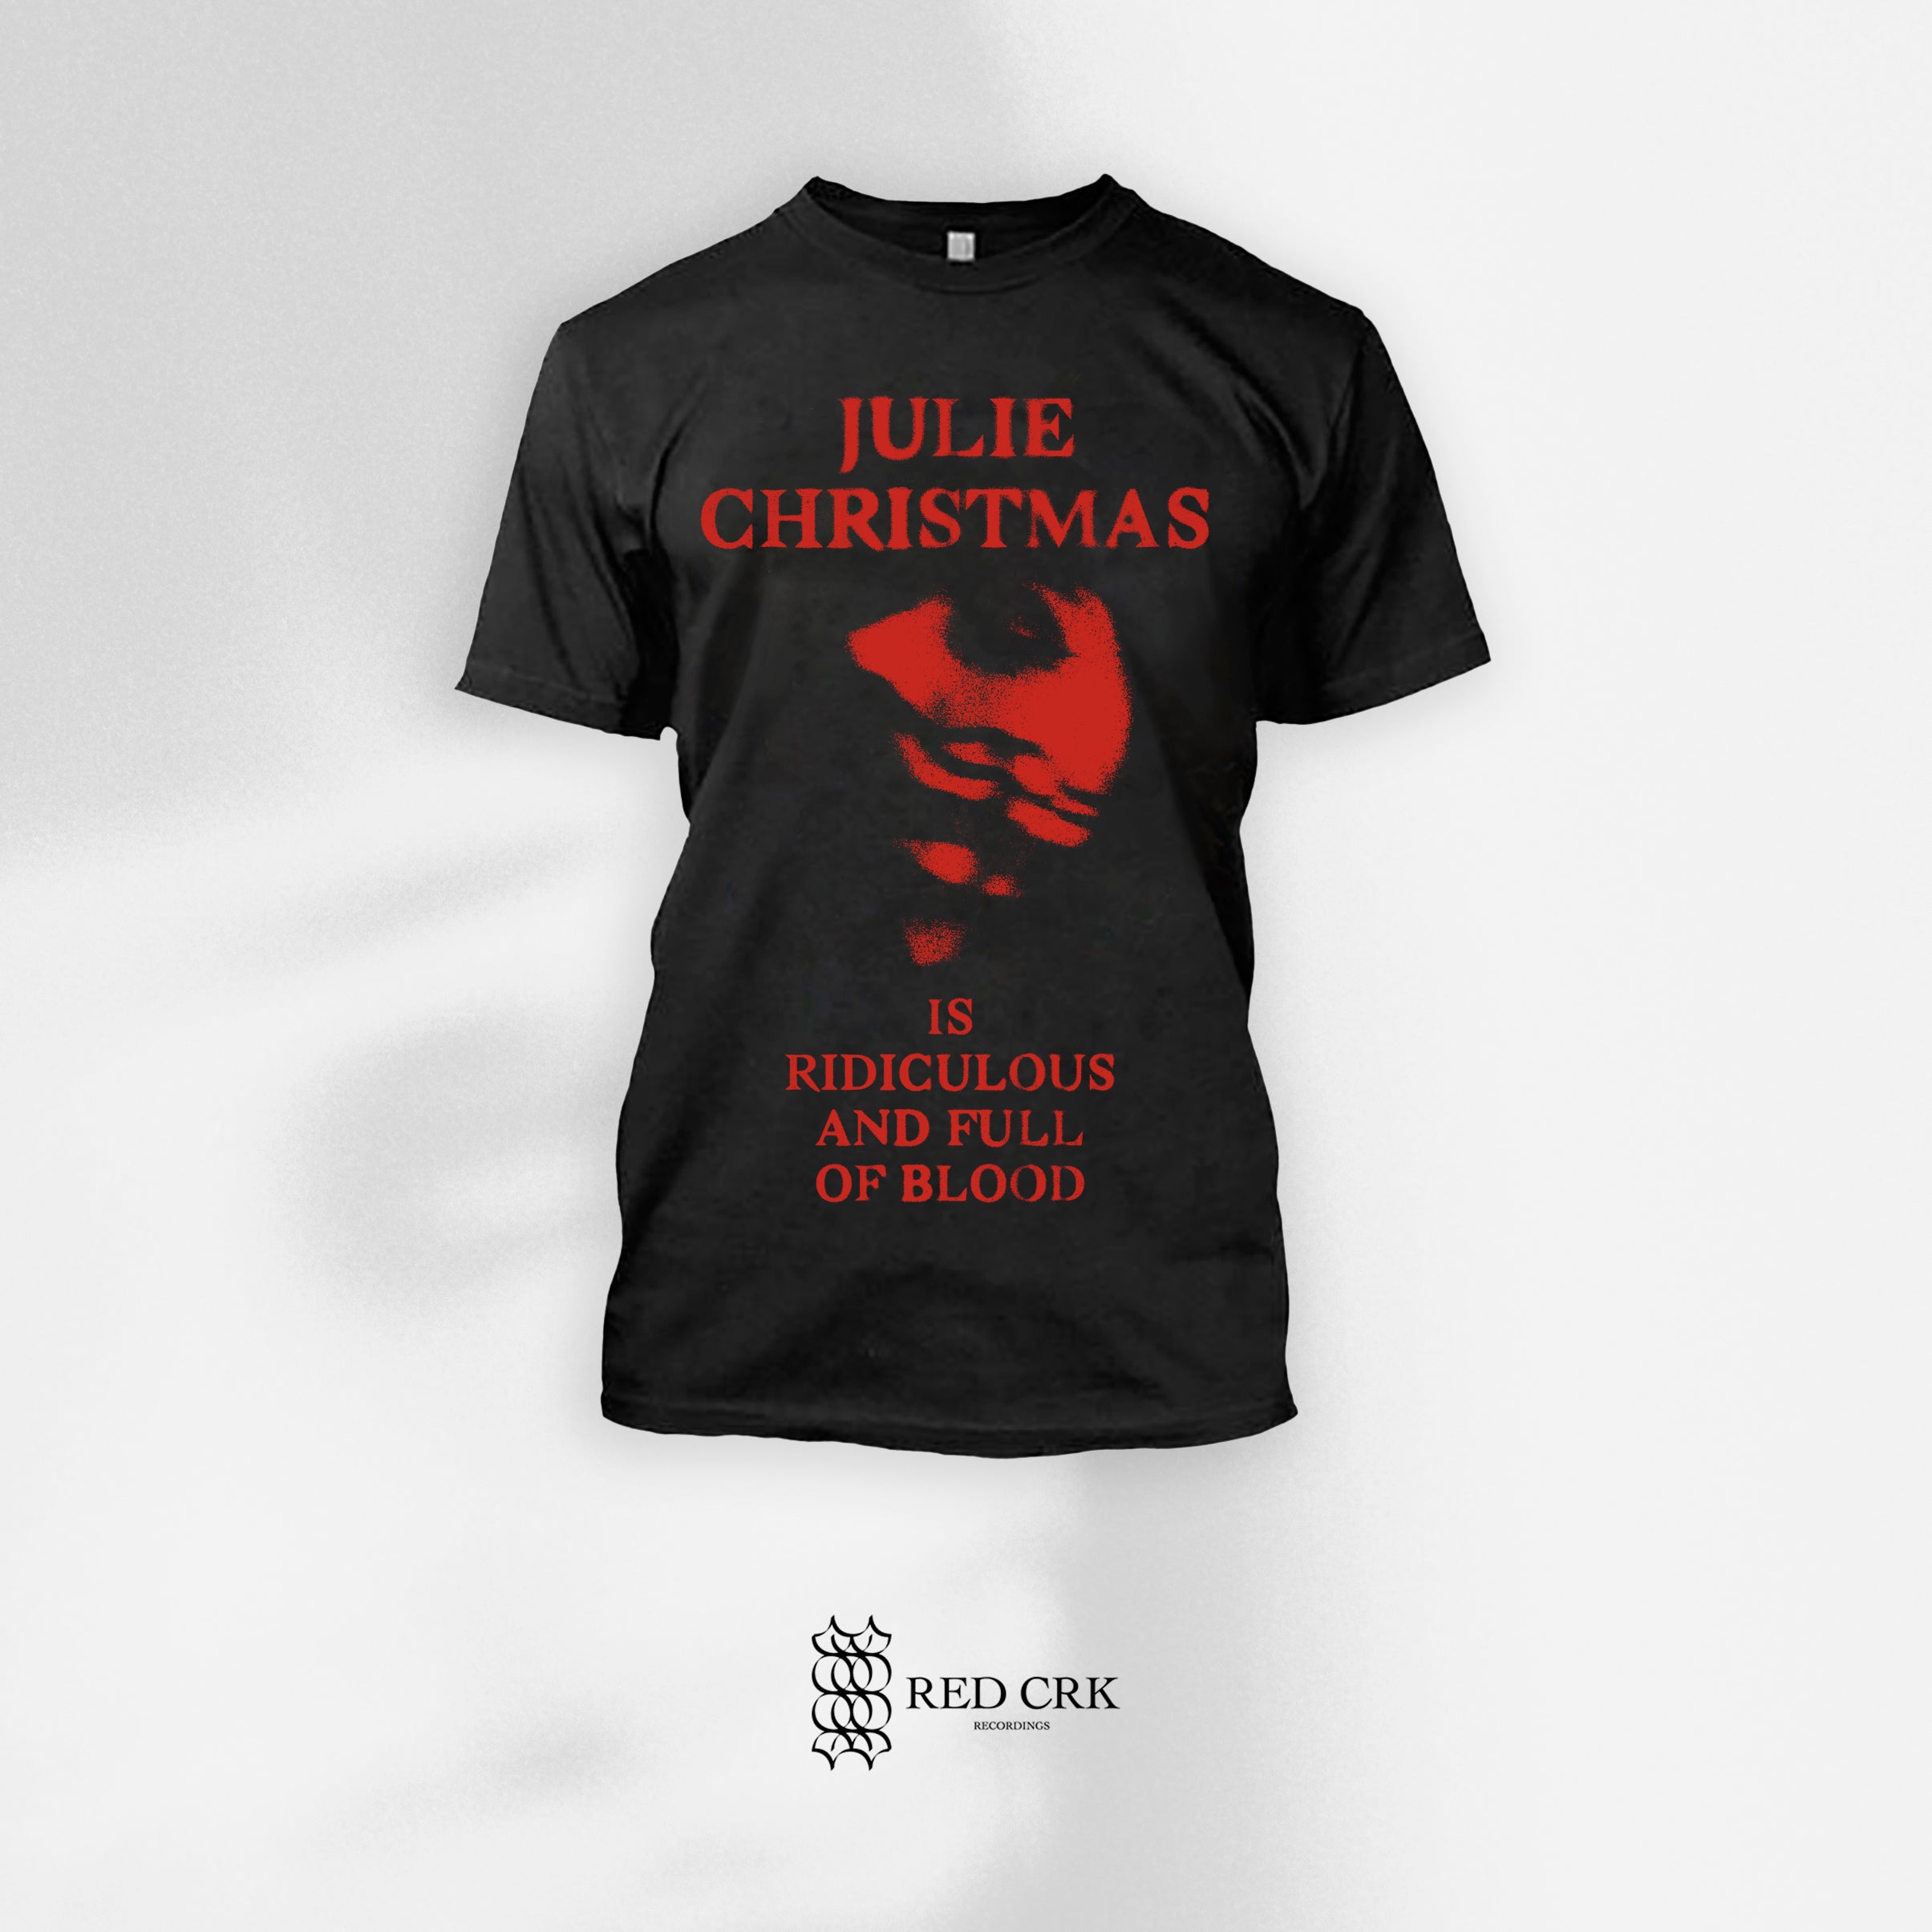 JULIE CHRISTMAS - Ridiculous And Full of Blood T-Shirt (Pre-Order)